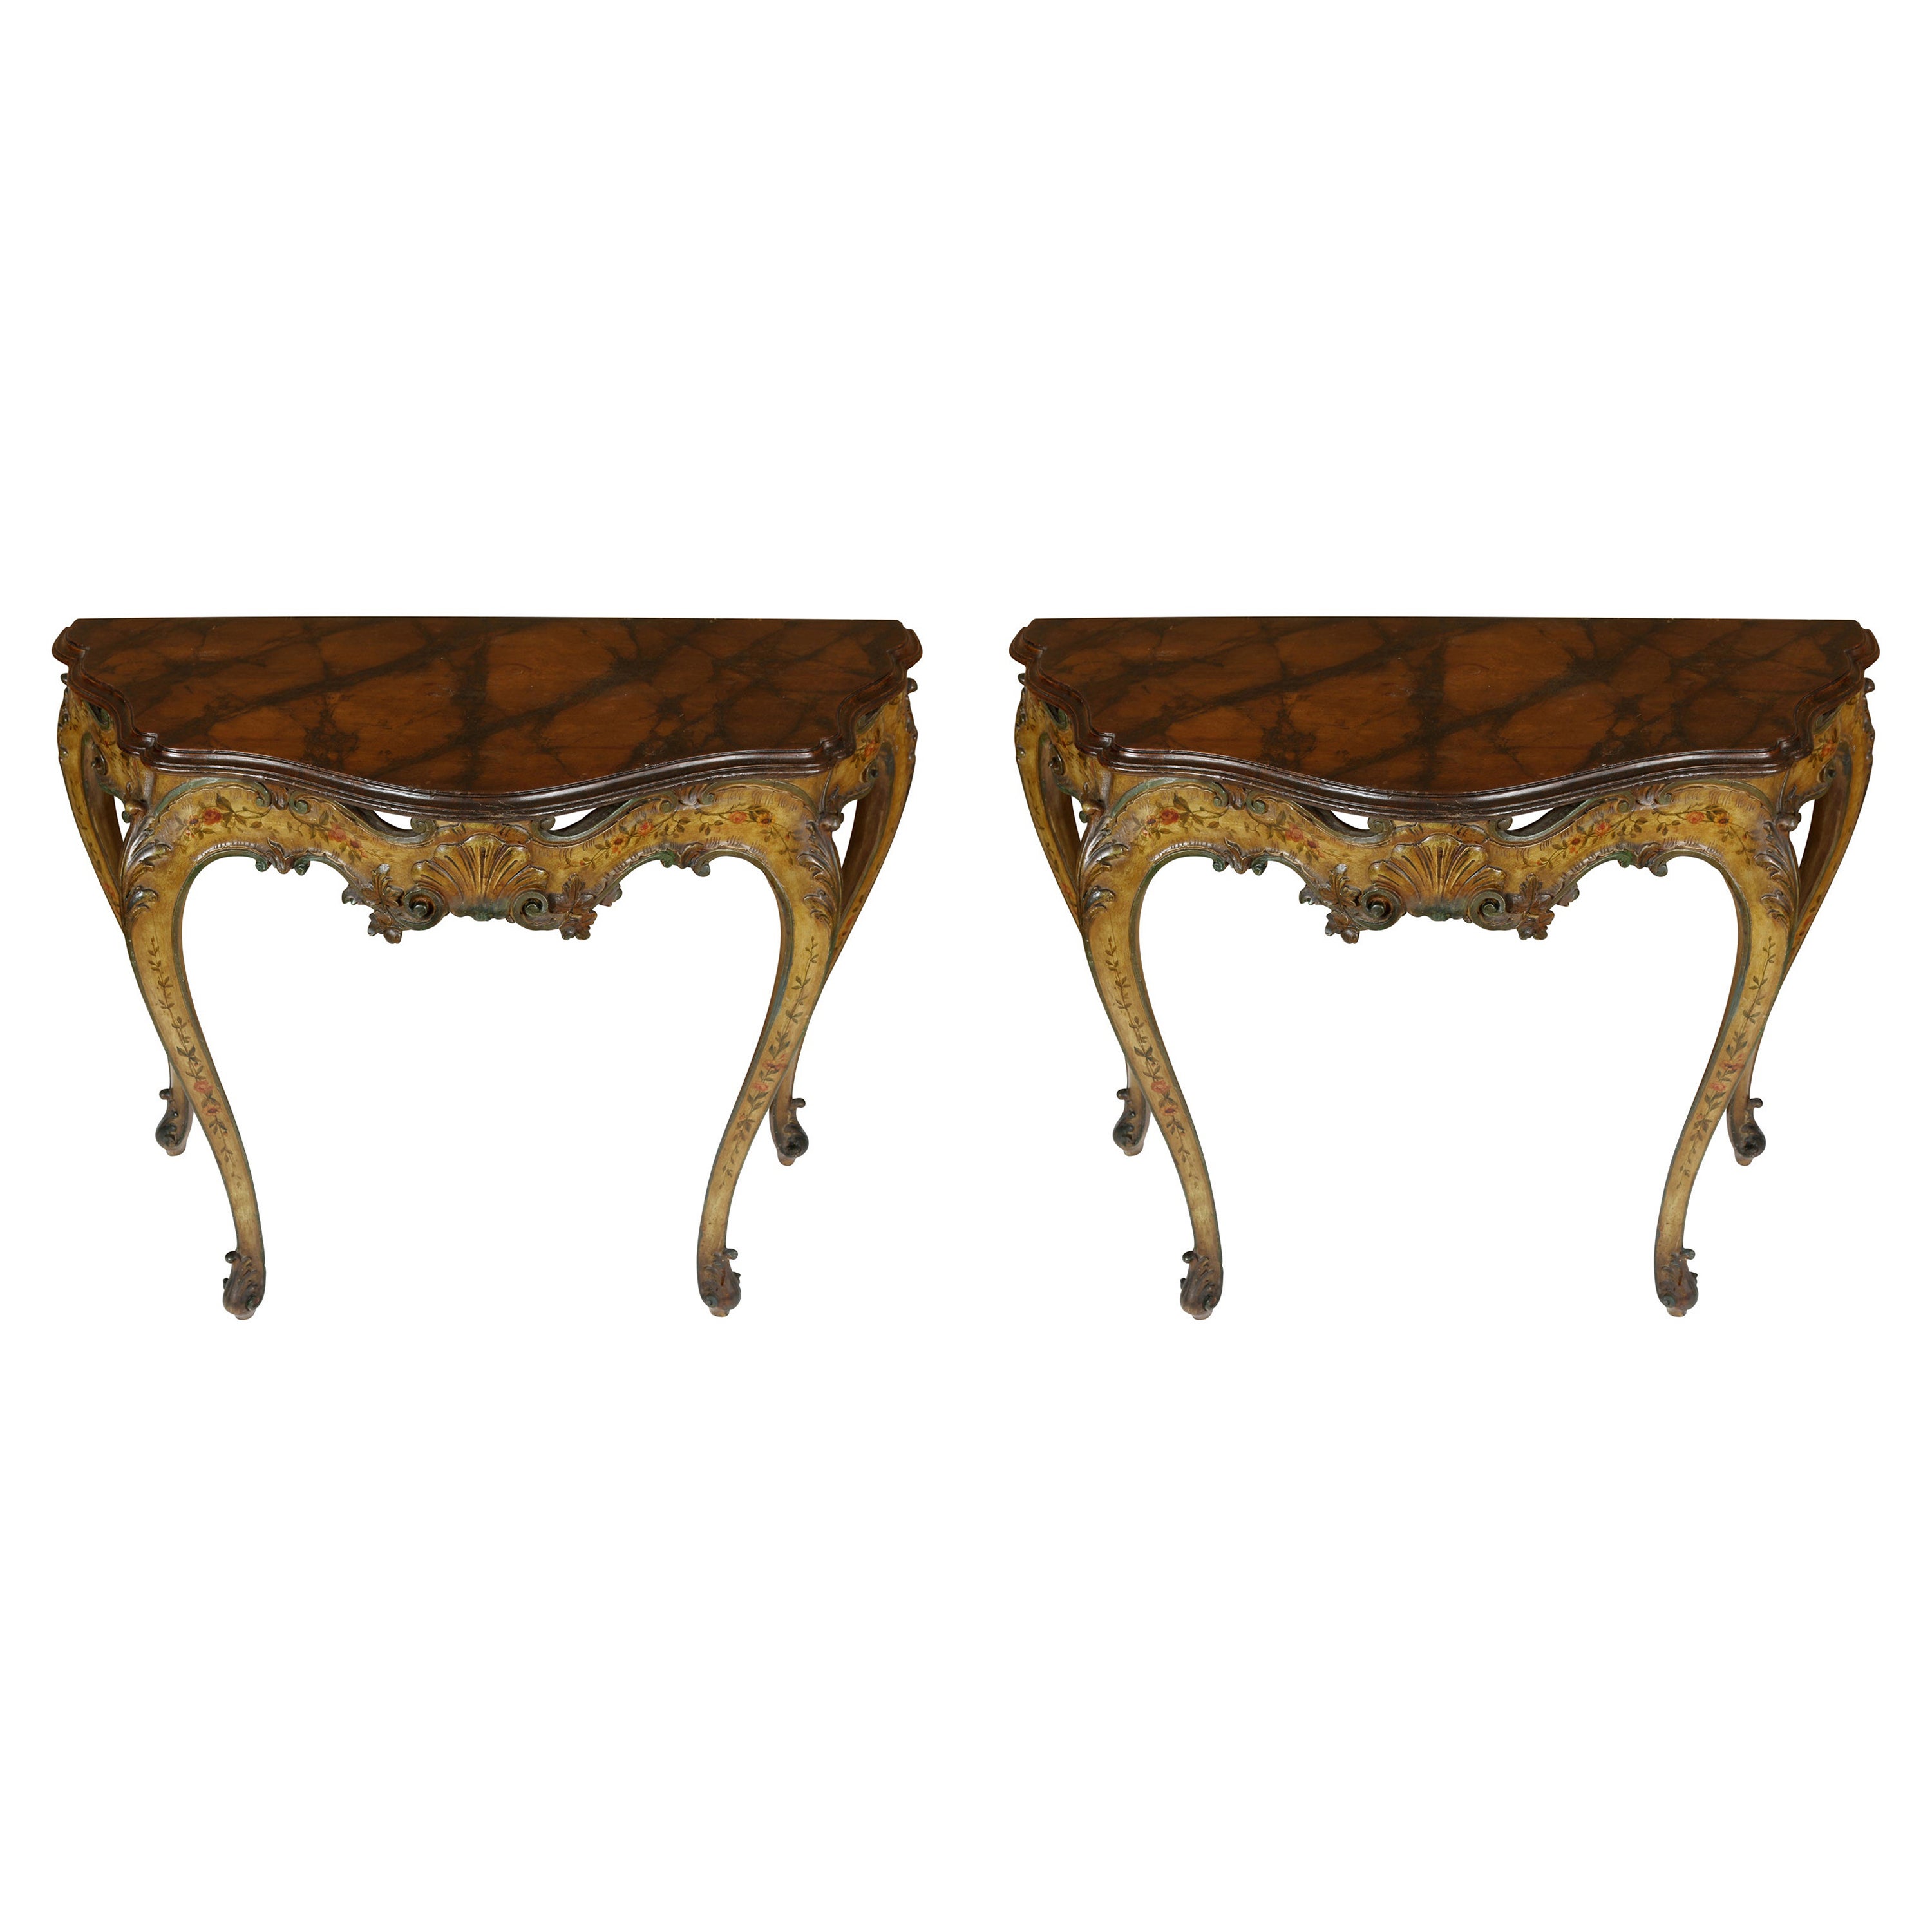 Pair of Italian Rococo Shaped and Carved Demilune Console Tables